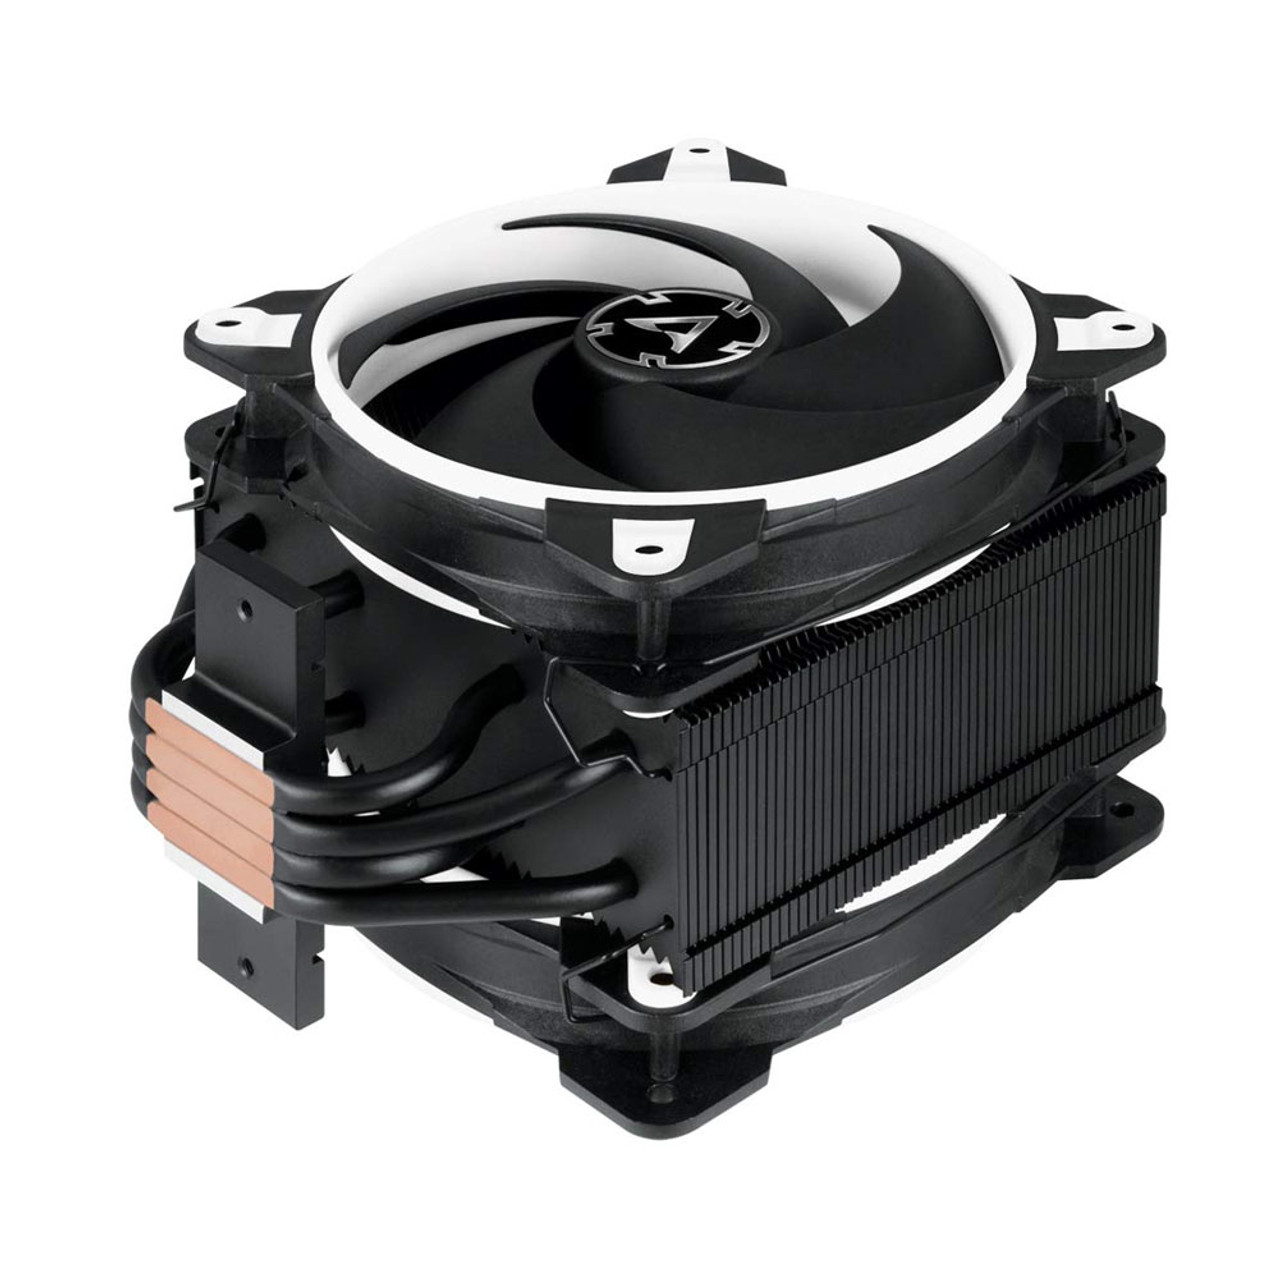 Arctic ACFRE00061A Freezer 34 eSports DUO Edition 120mm 2100RPM Tower CPU Cooler Fans White